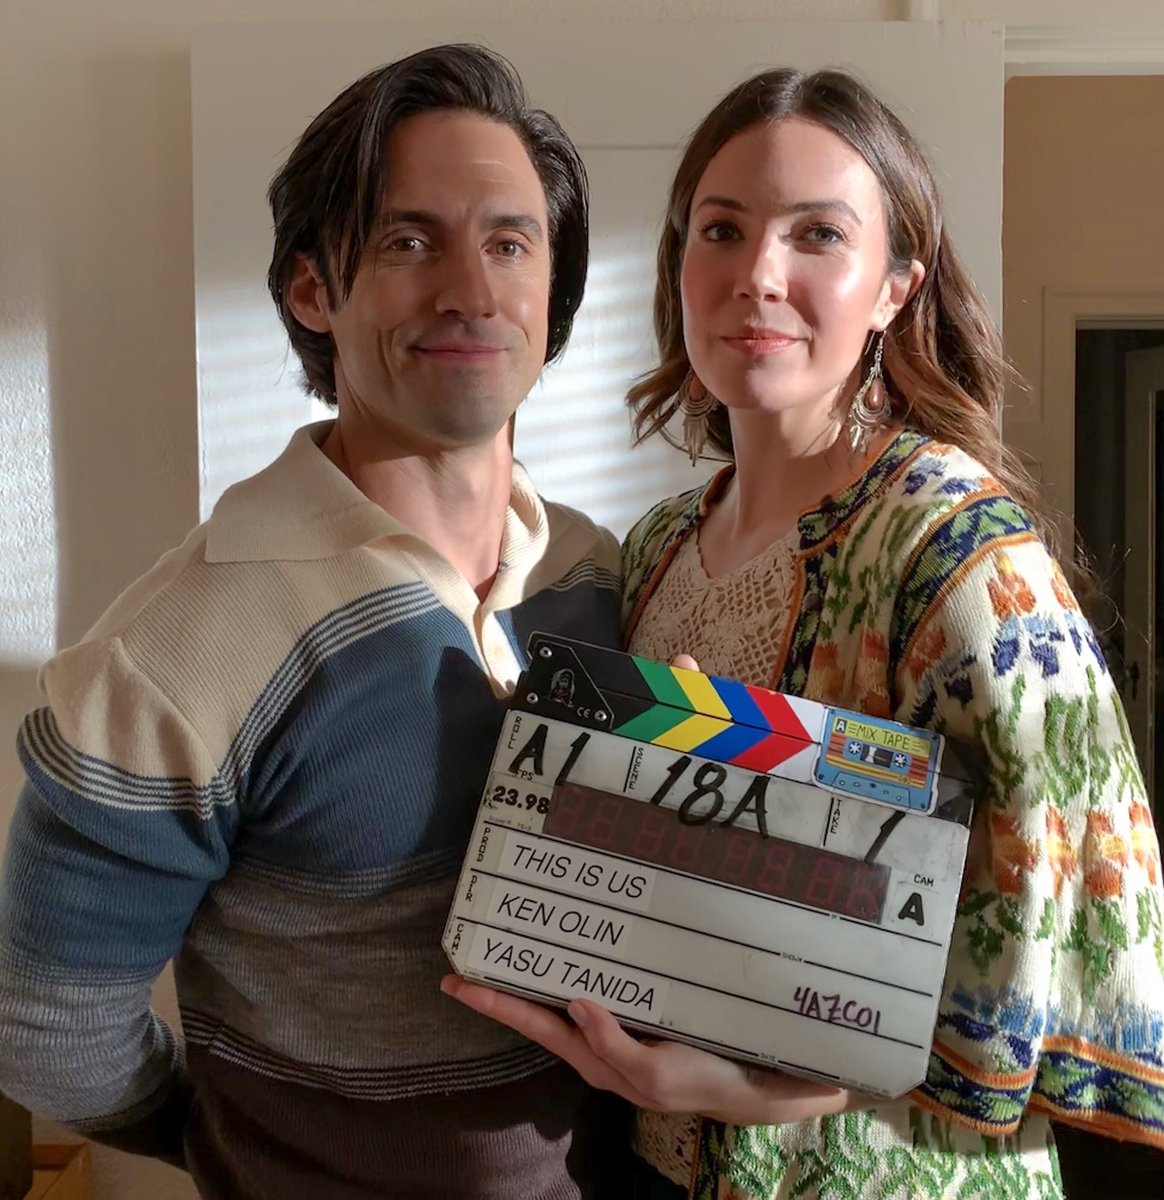 Mom and Dad are back shooting the very first scene of season 4. Can’t wait for you to see!???? #thisisus https://t.co/ejVbWc8fOi